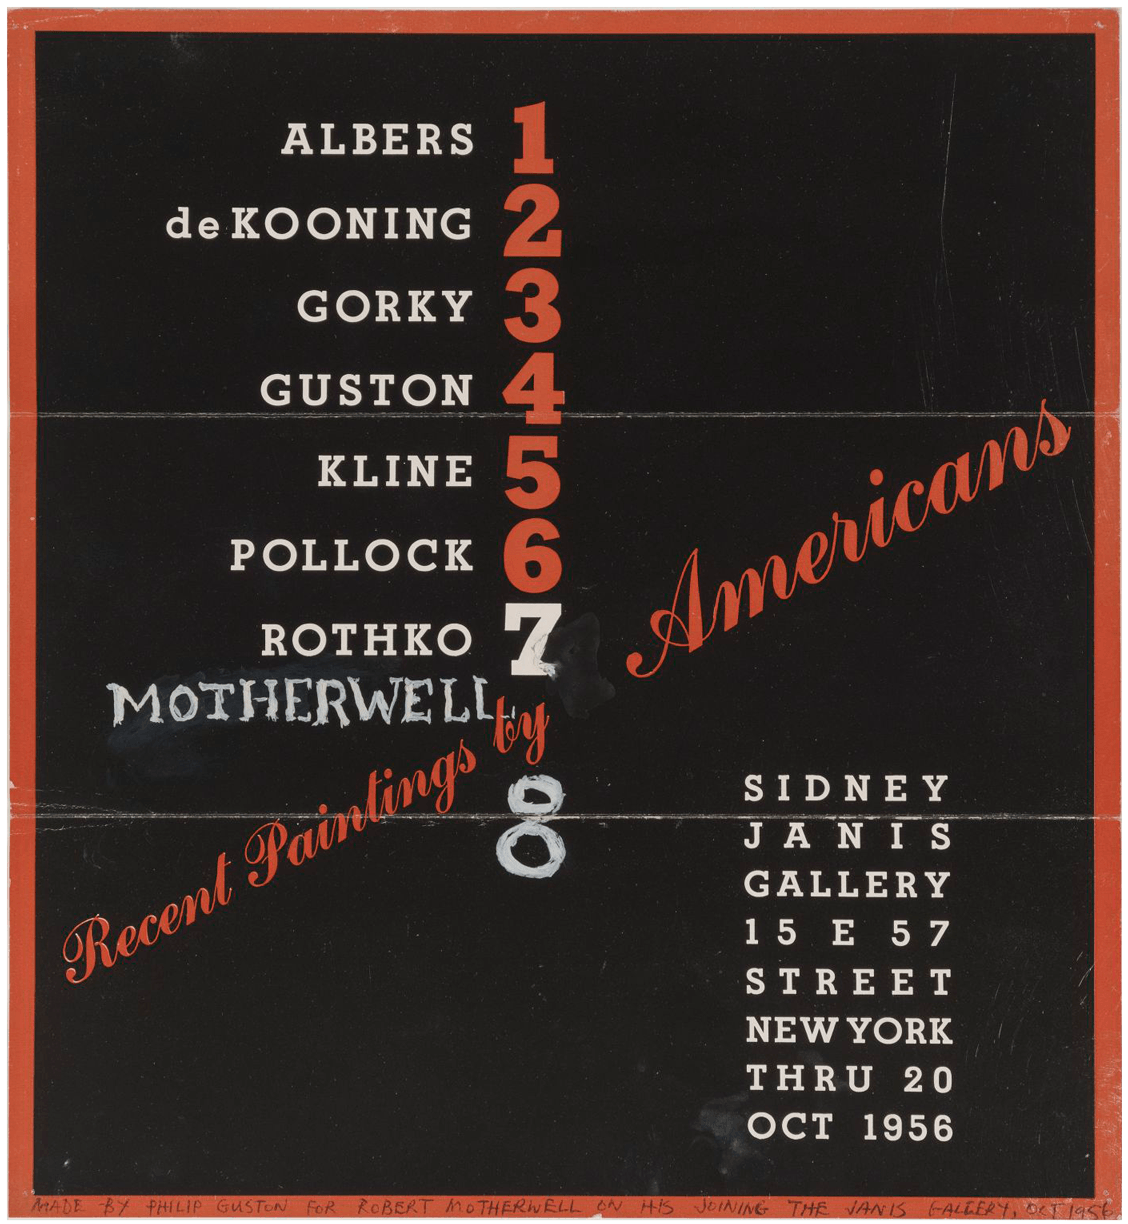 Poster for Recent Paintings by 8 Americans, Sidney Janis Gallery, New York, October 1956. Features red and white text on a black background. Motherwell's name is painted on.